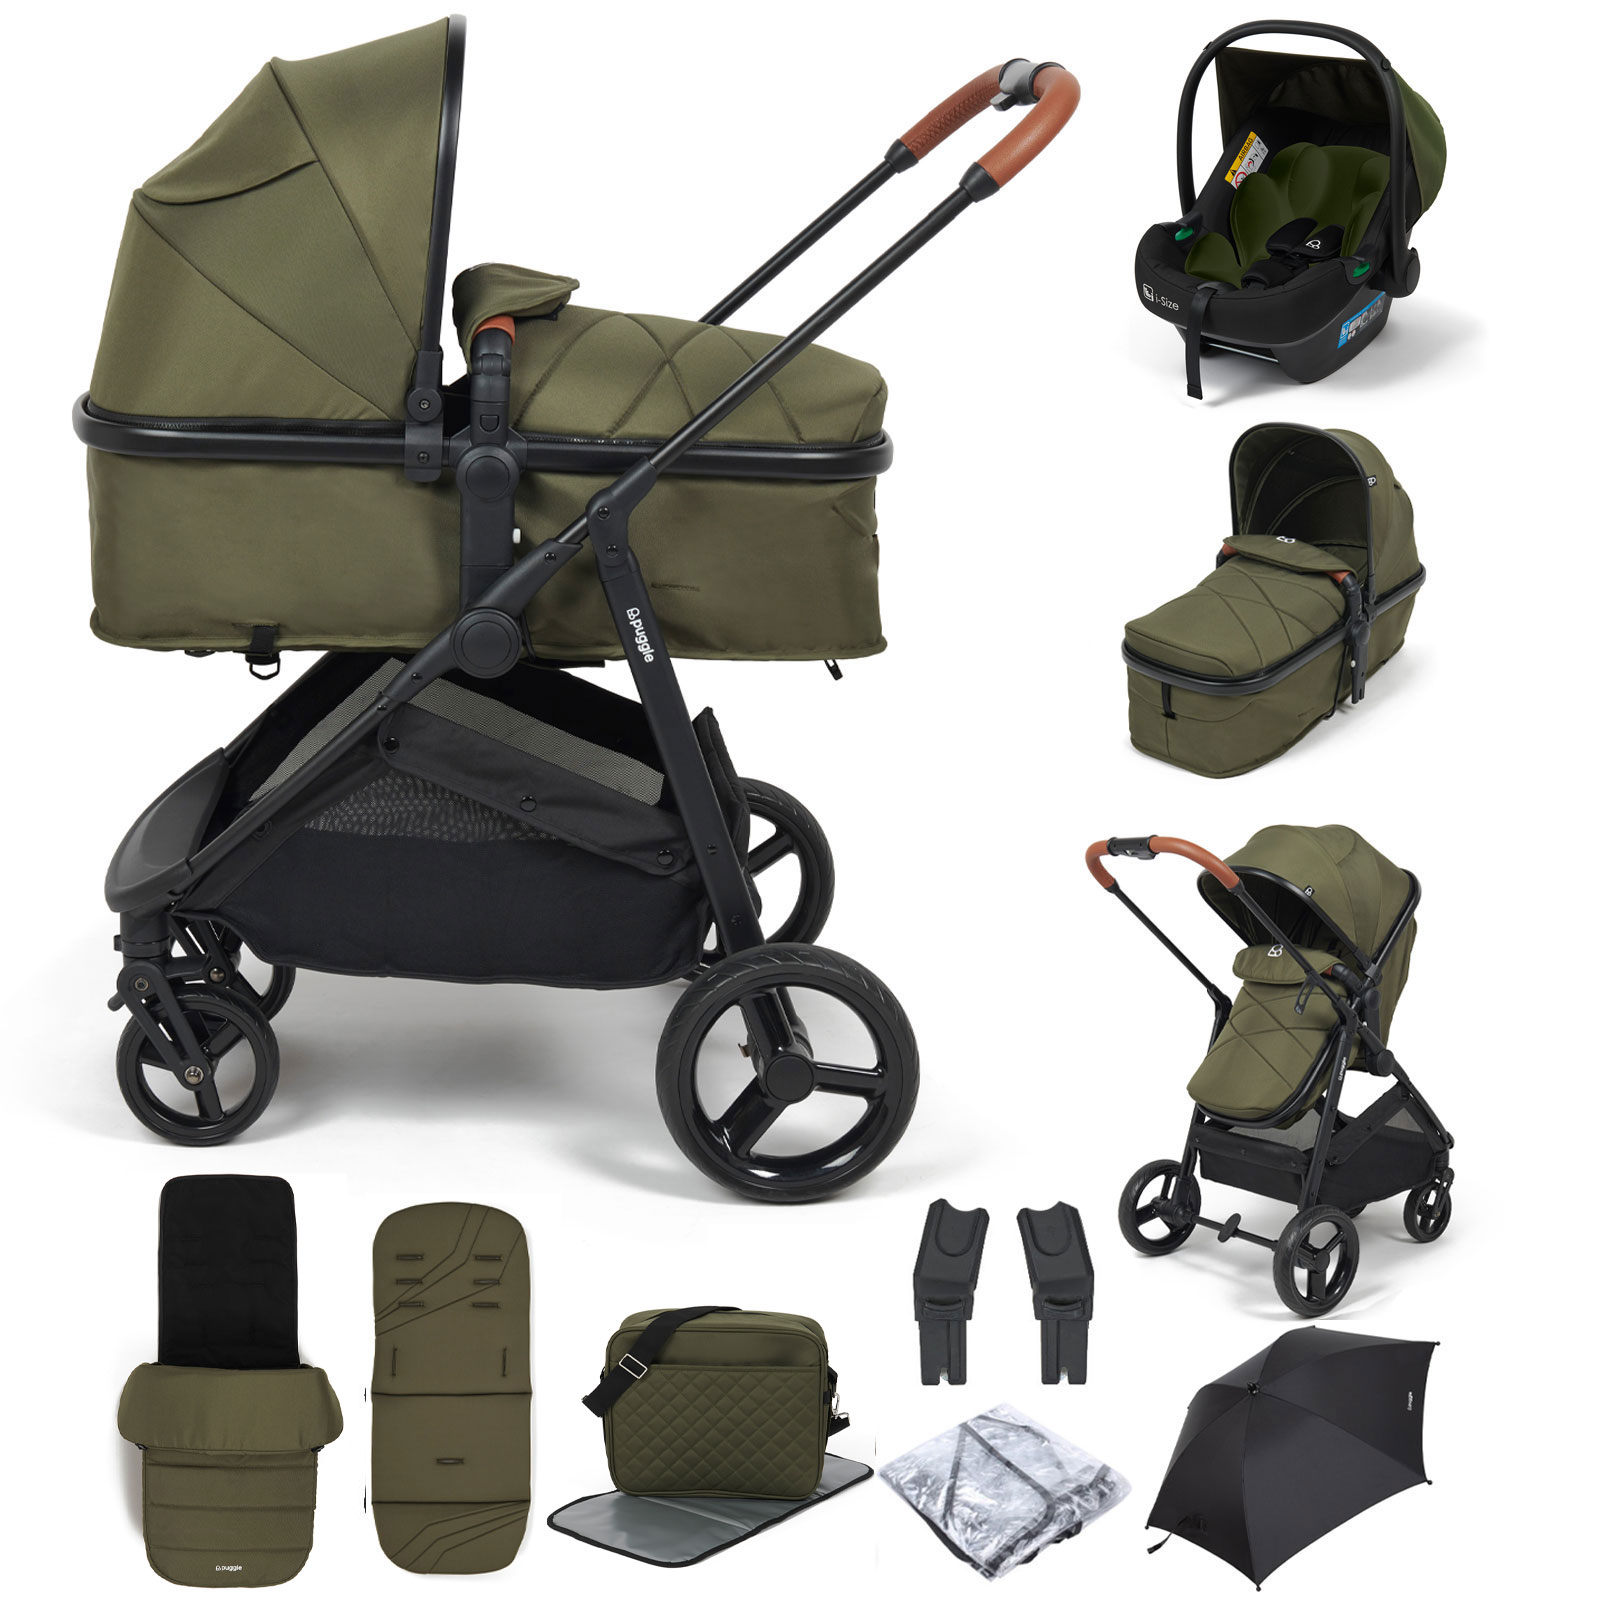 Puggle Monaco XT 2in1 i-Size Pram Pushchair Travel System with Footmuff, Changing Bag & Parasol - Forest Green